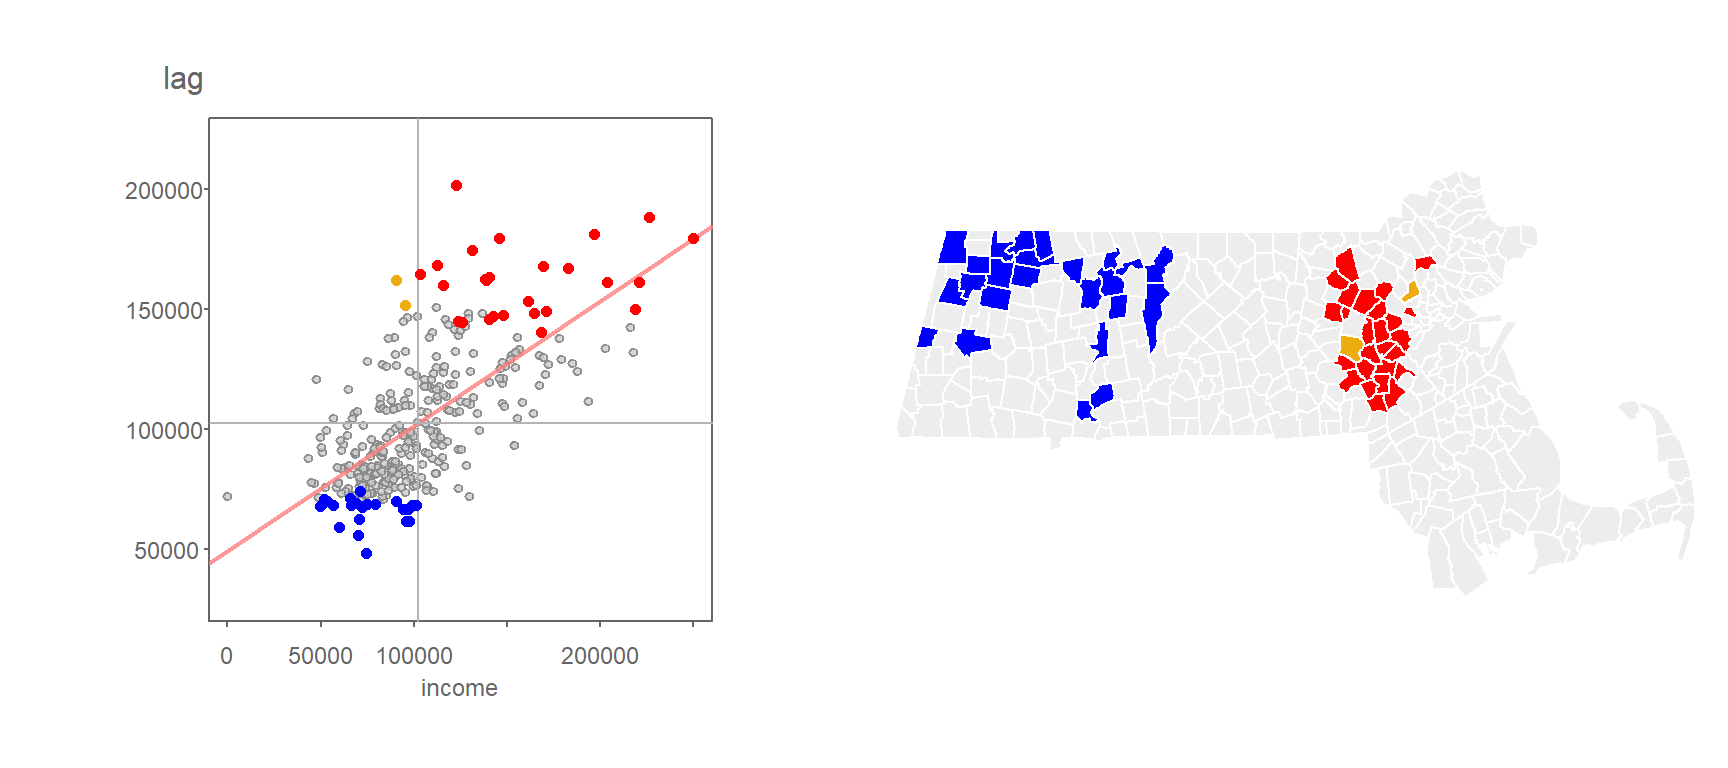 Clusters deemed significant at the p=0.05 level when applying the FDR correction.